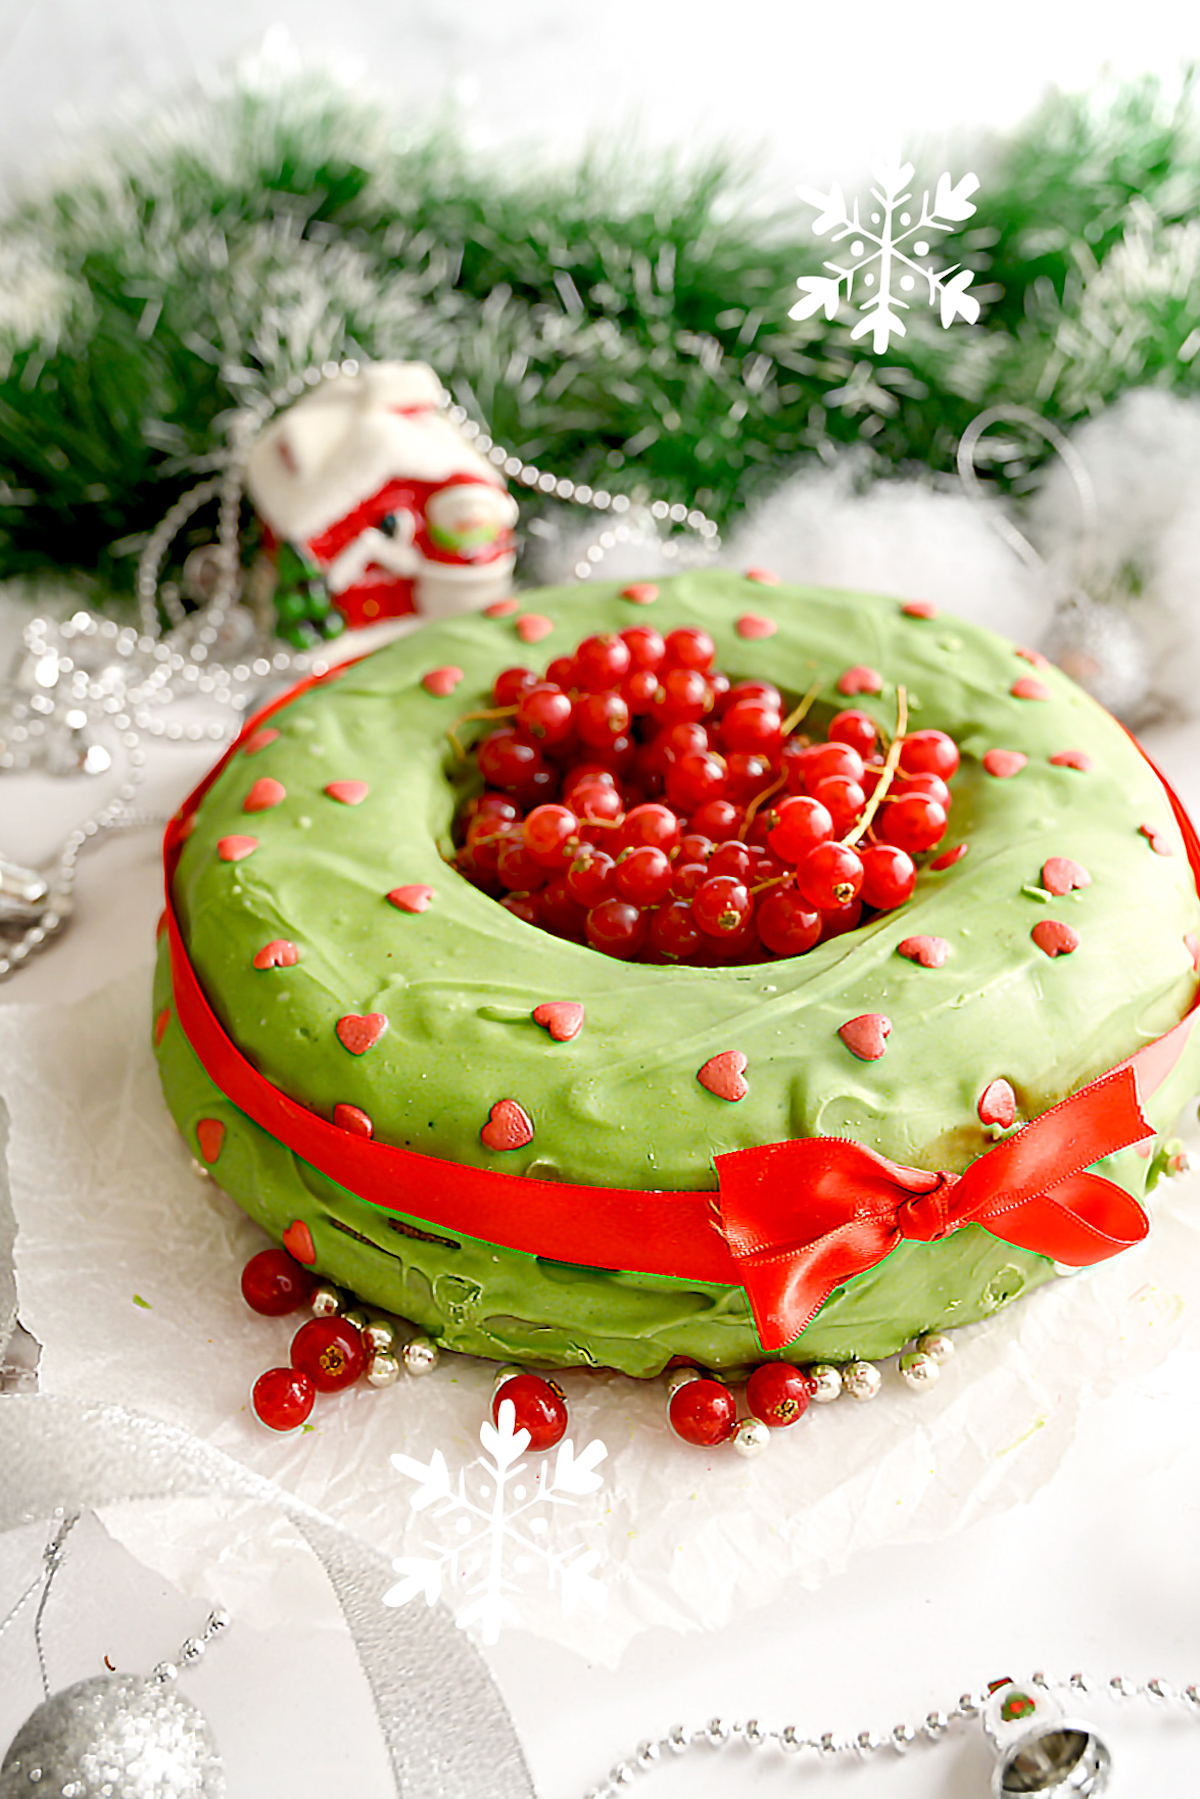 A Christmas cake with a red ribbon tied around it.